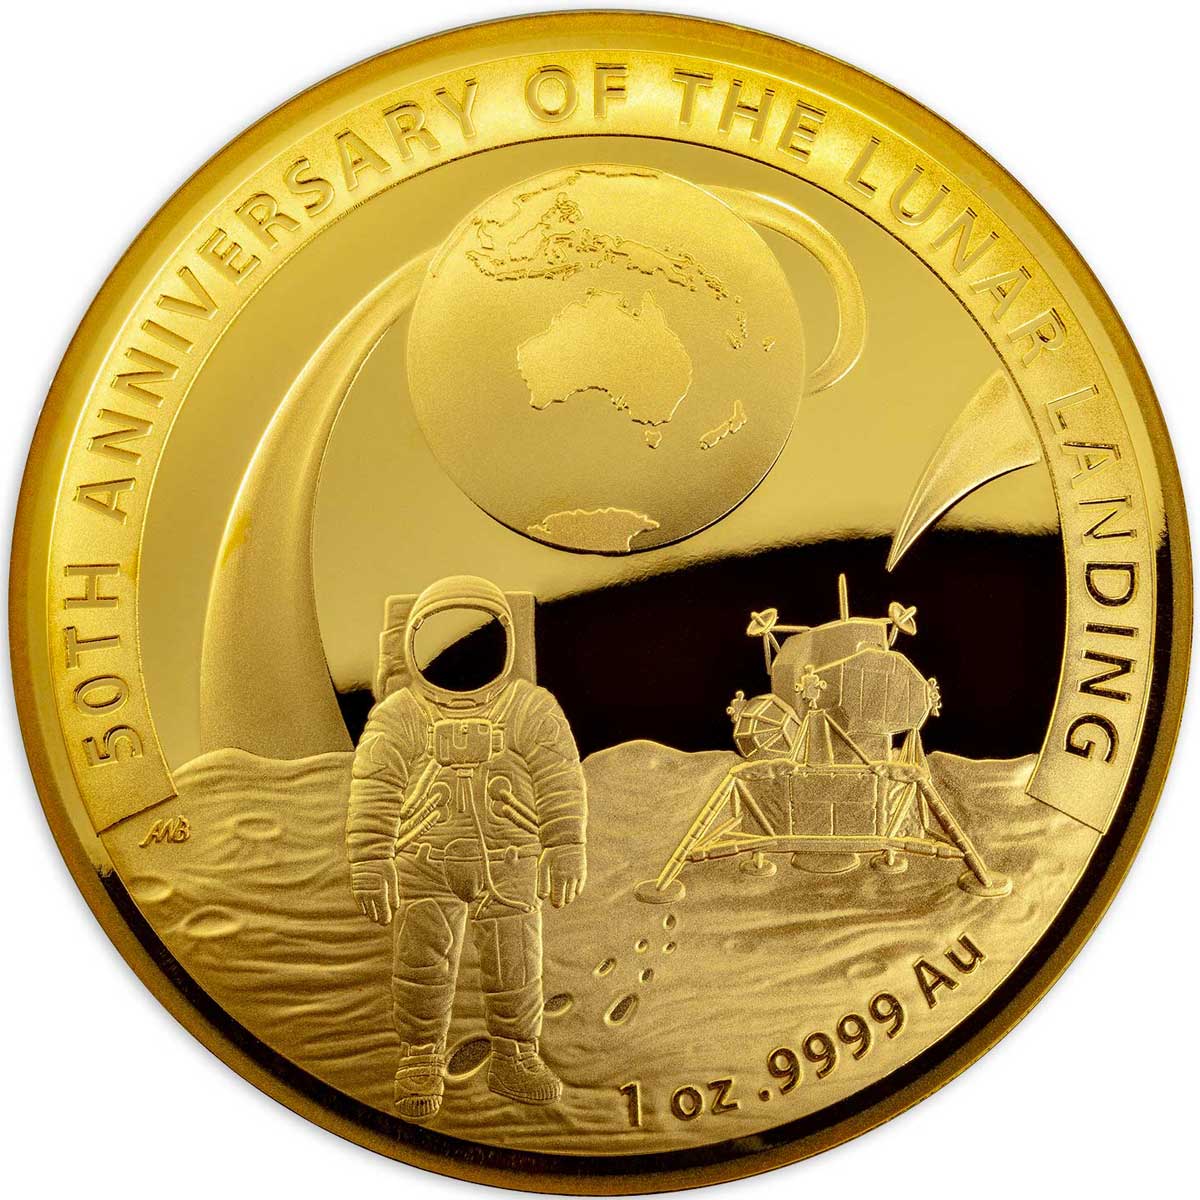 Details about   Moon Landing 50th Anniversary Prooflike Commemorative 